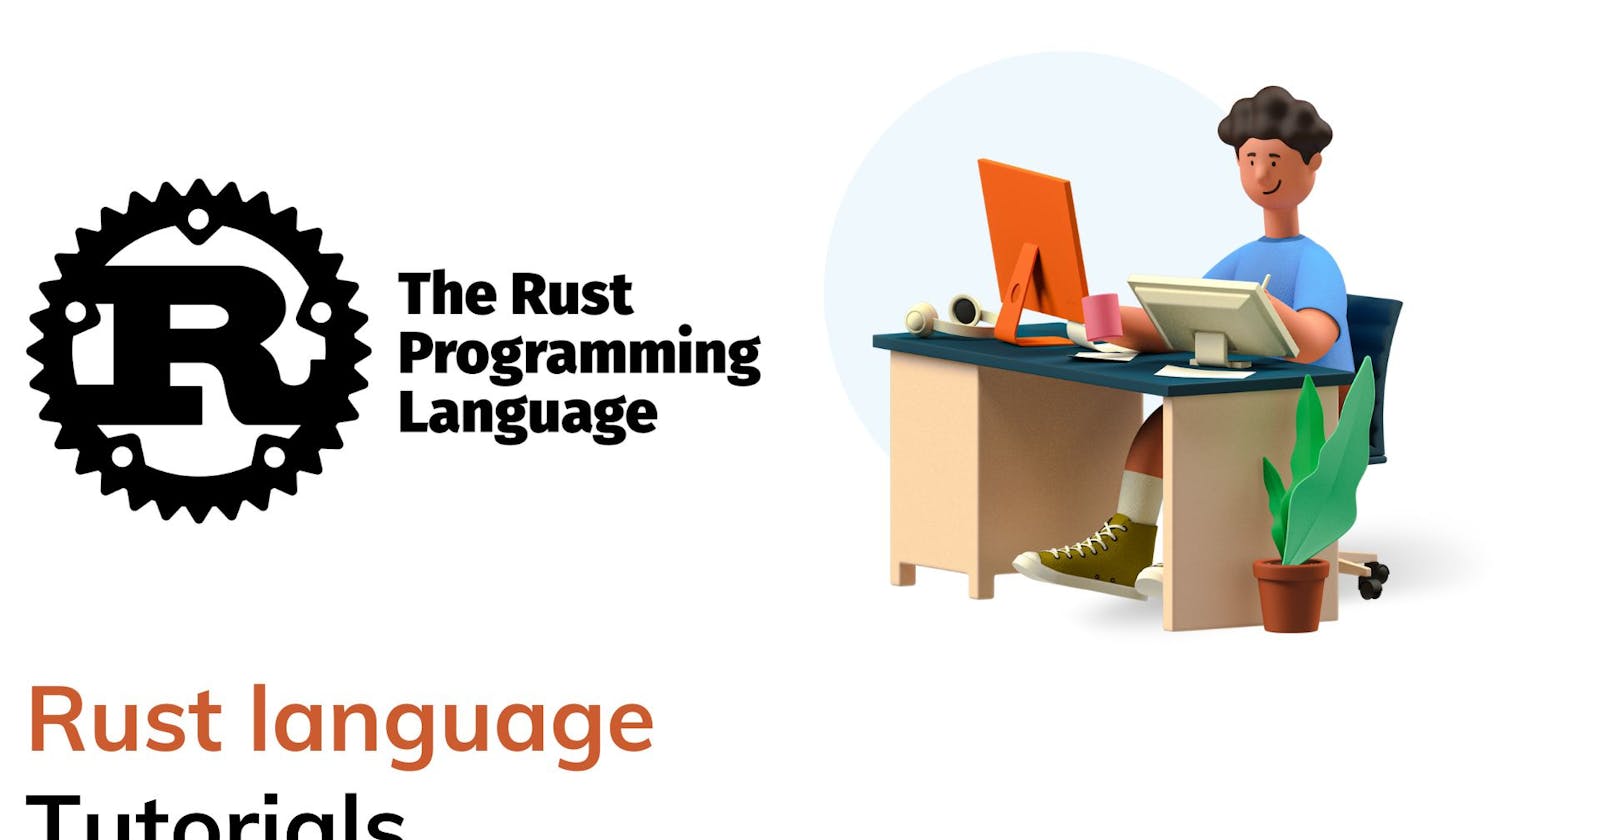 Day 24: Practice coding exercise on String and collections in Rust.